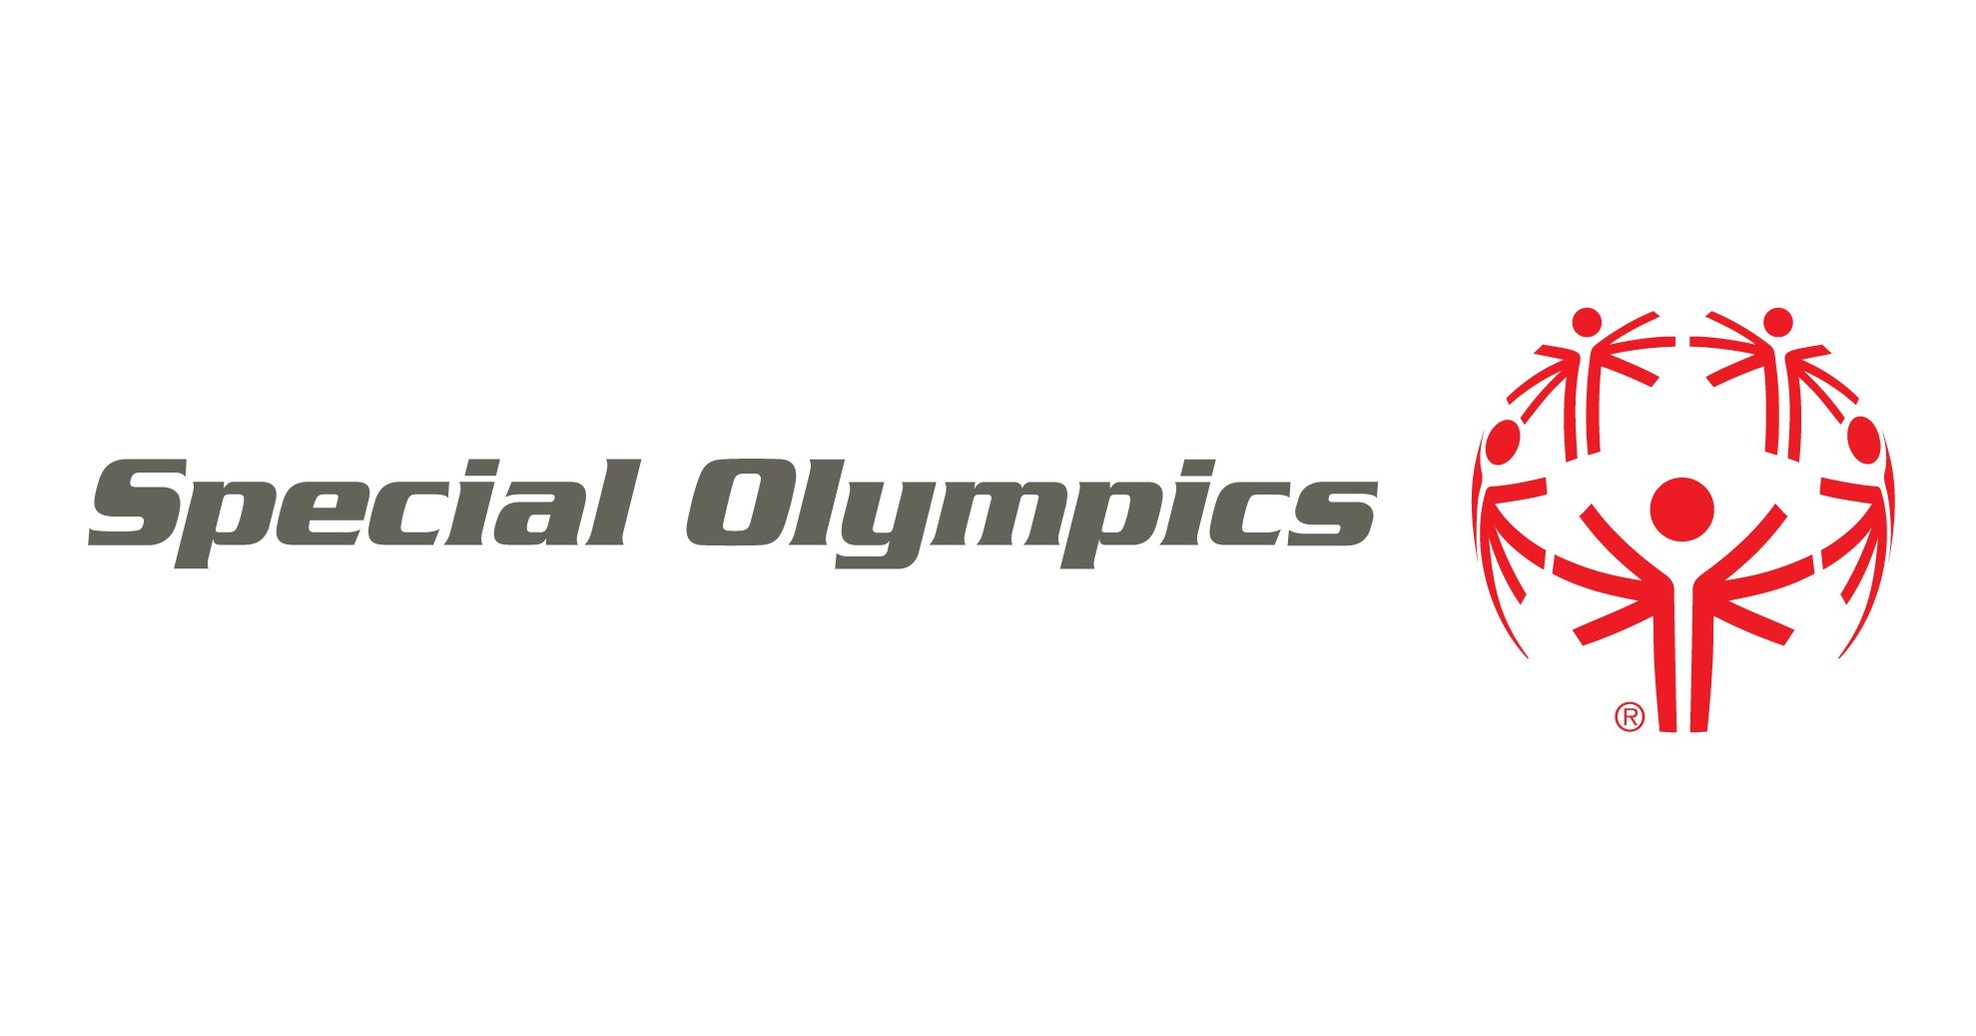 Special Olympics Announces Global Expansion of Initiative for Inclusion